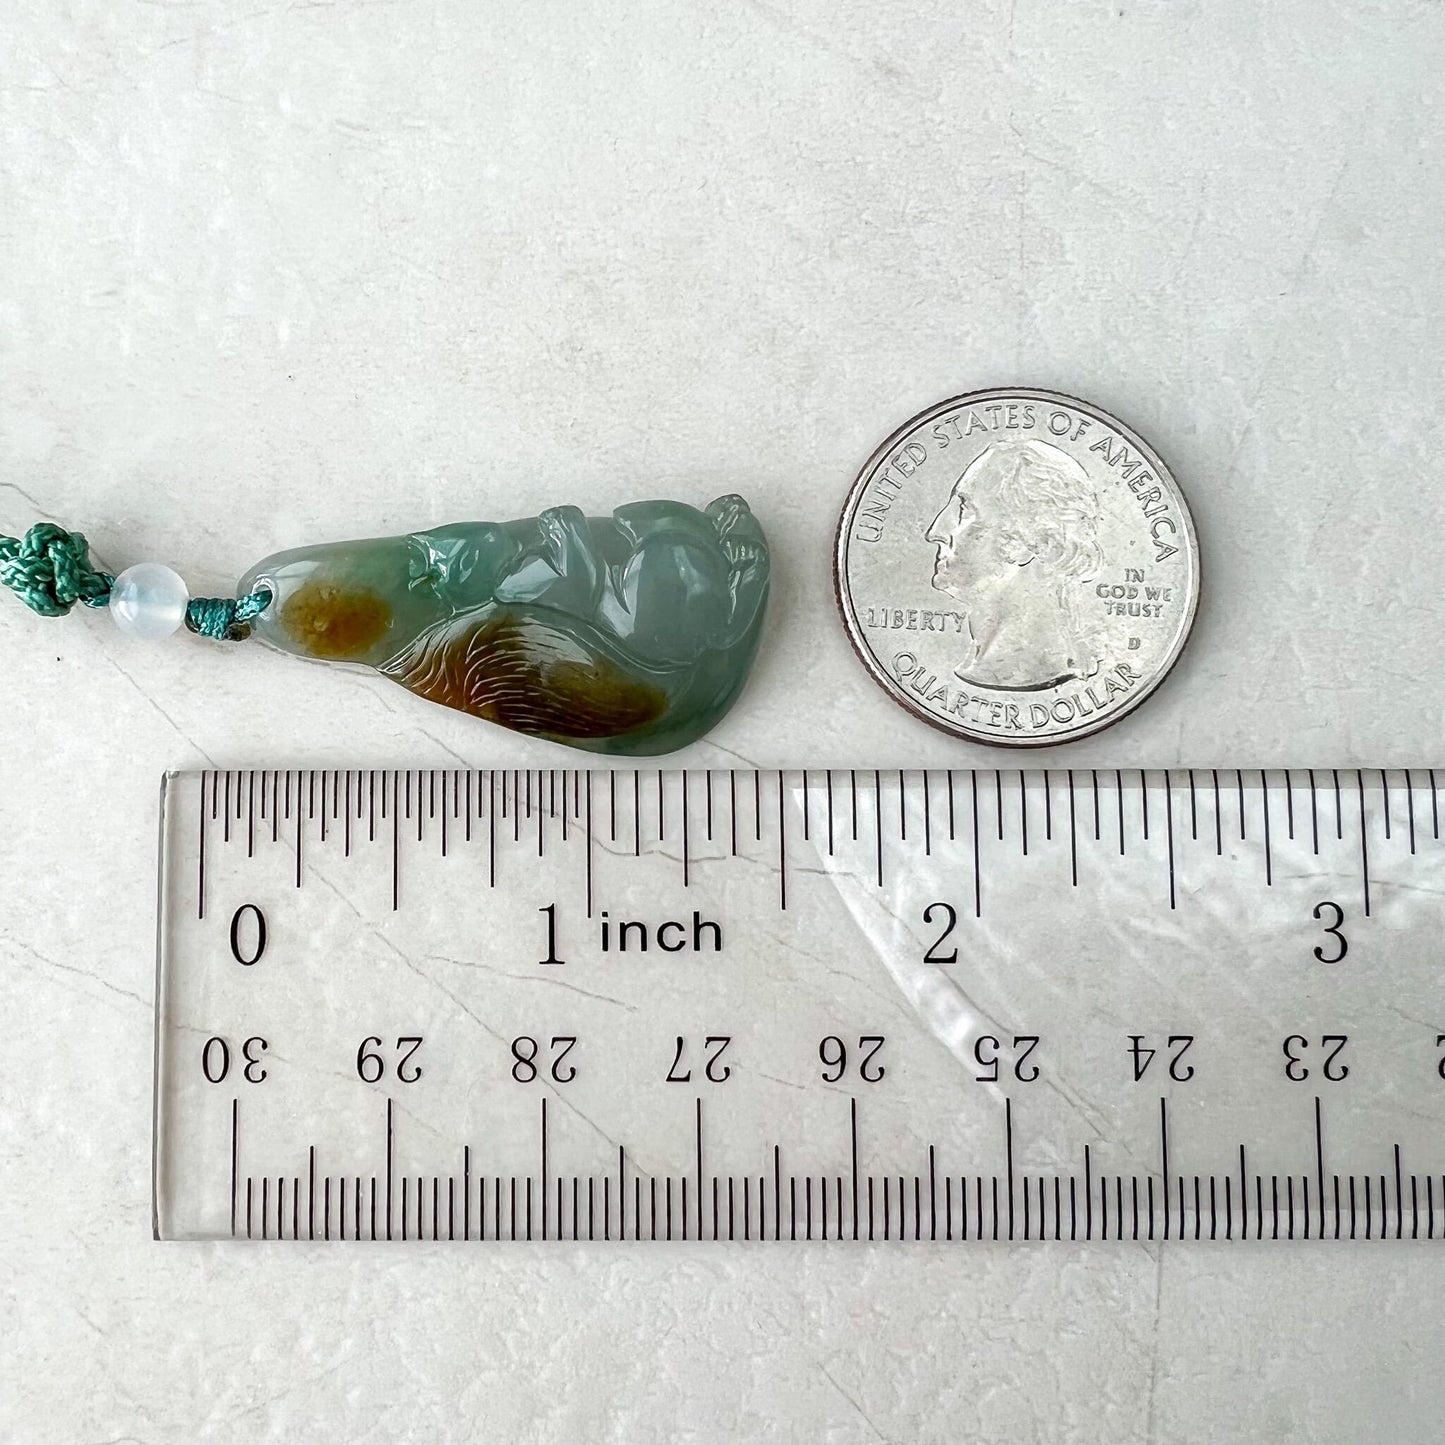 Small Green Red Jadeite Jade Squirrel Pendant, Hand Carved, LZG-0222-1673822406